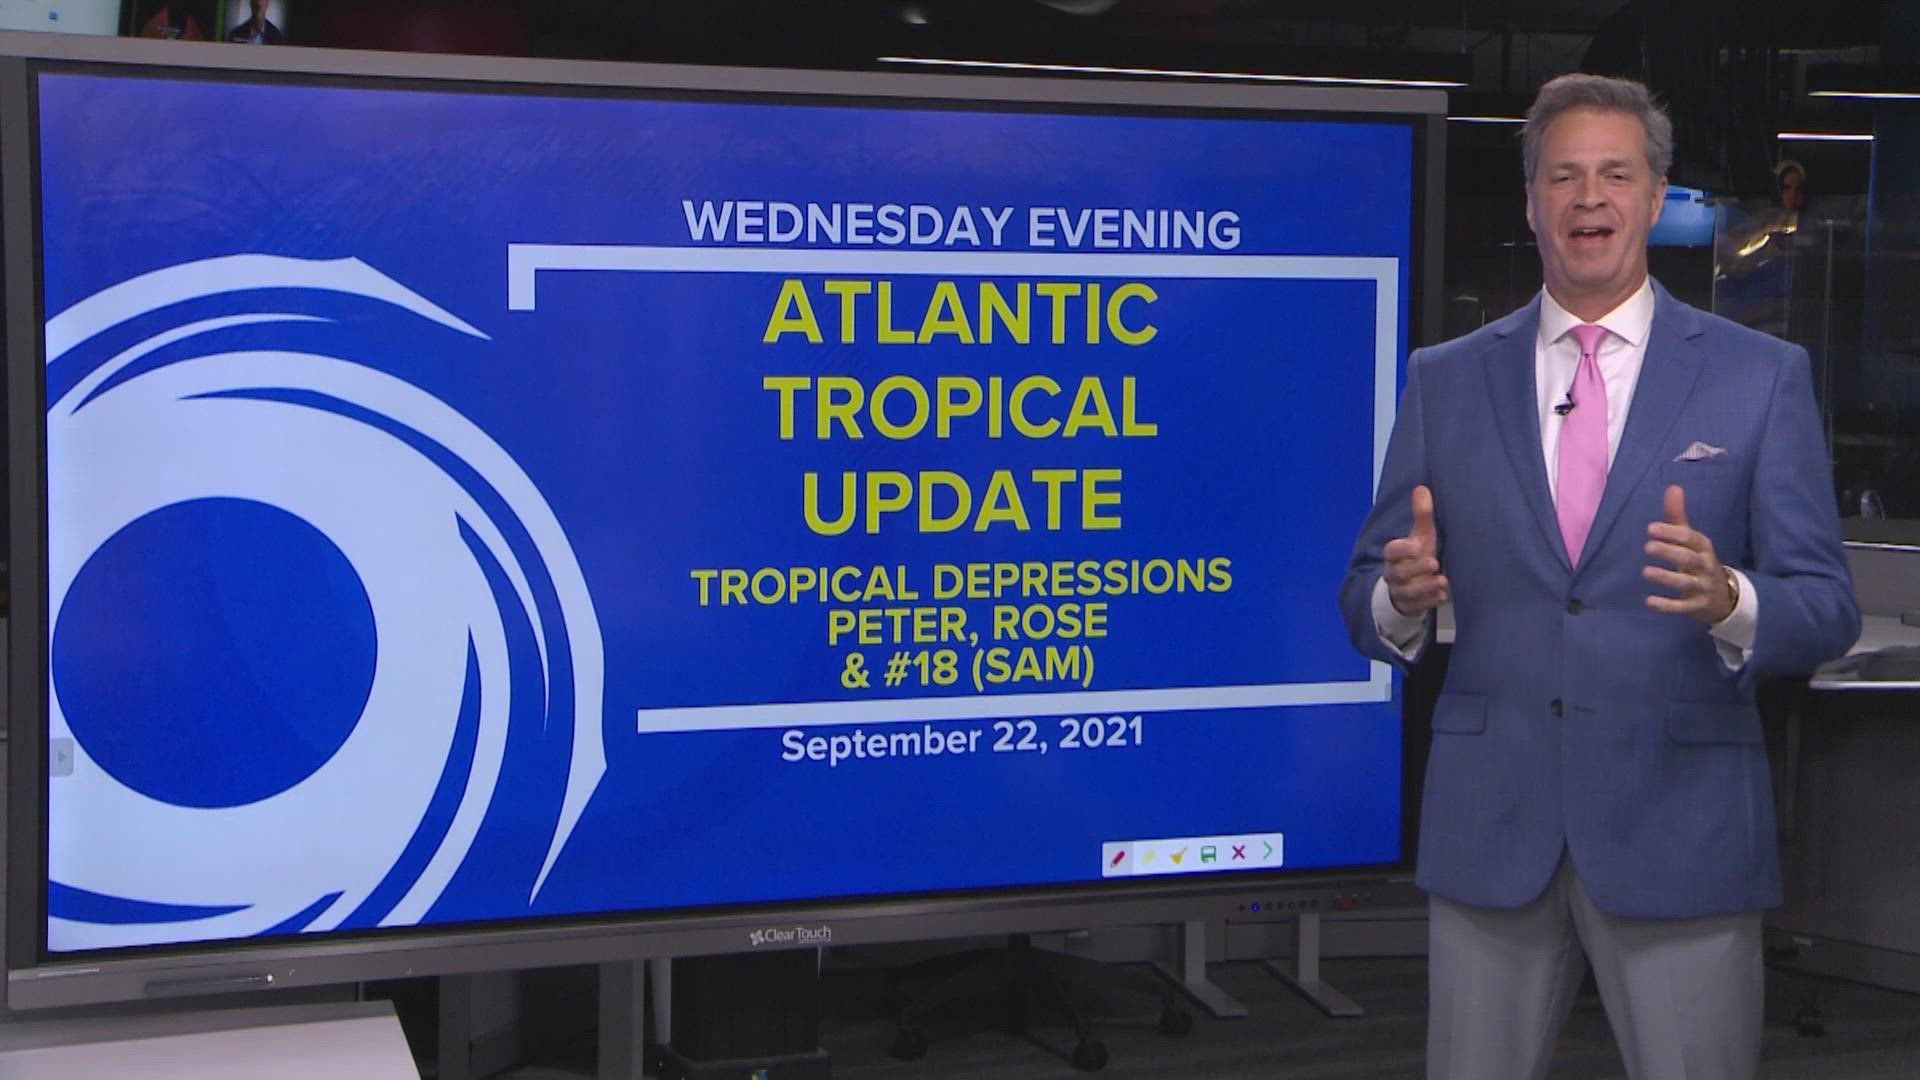 KHOU 11 Chief Meteorologist David Paul provides an update on Tropical Storms Peter and Rose, as well as #18.